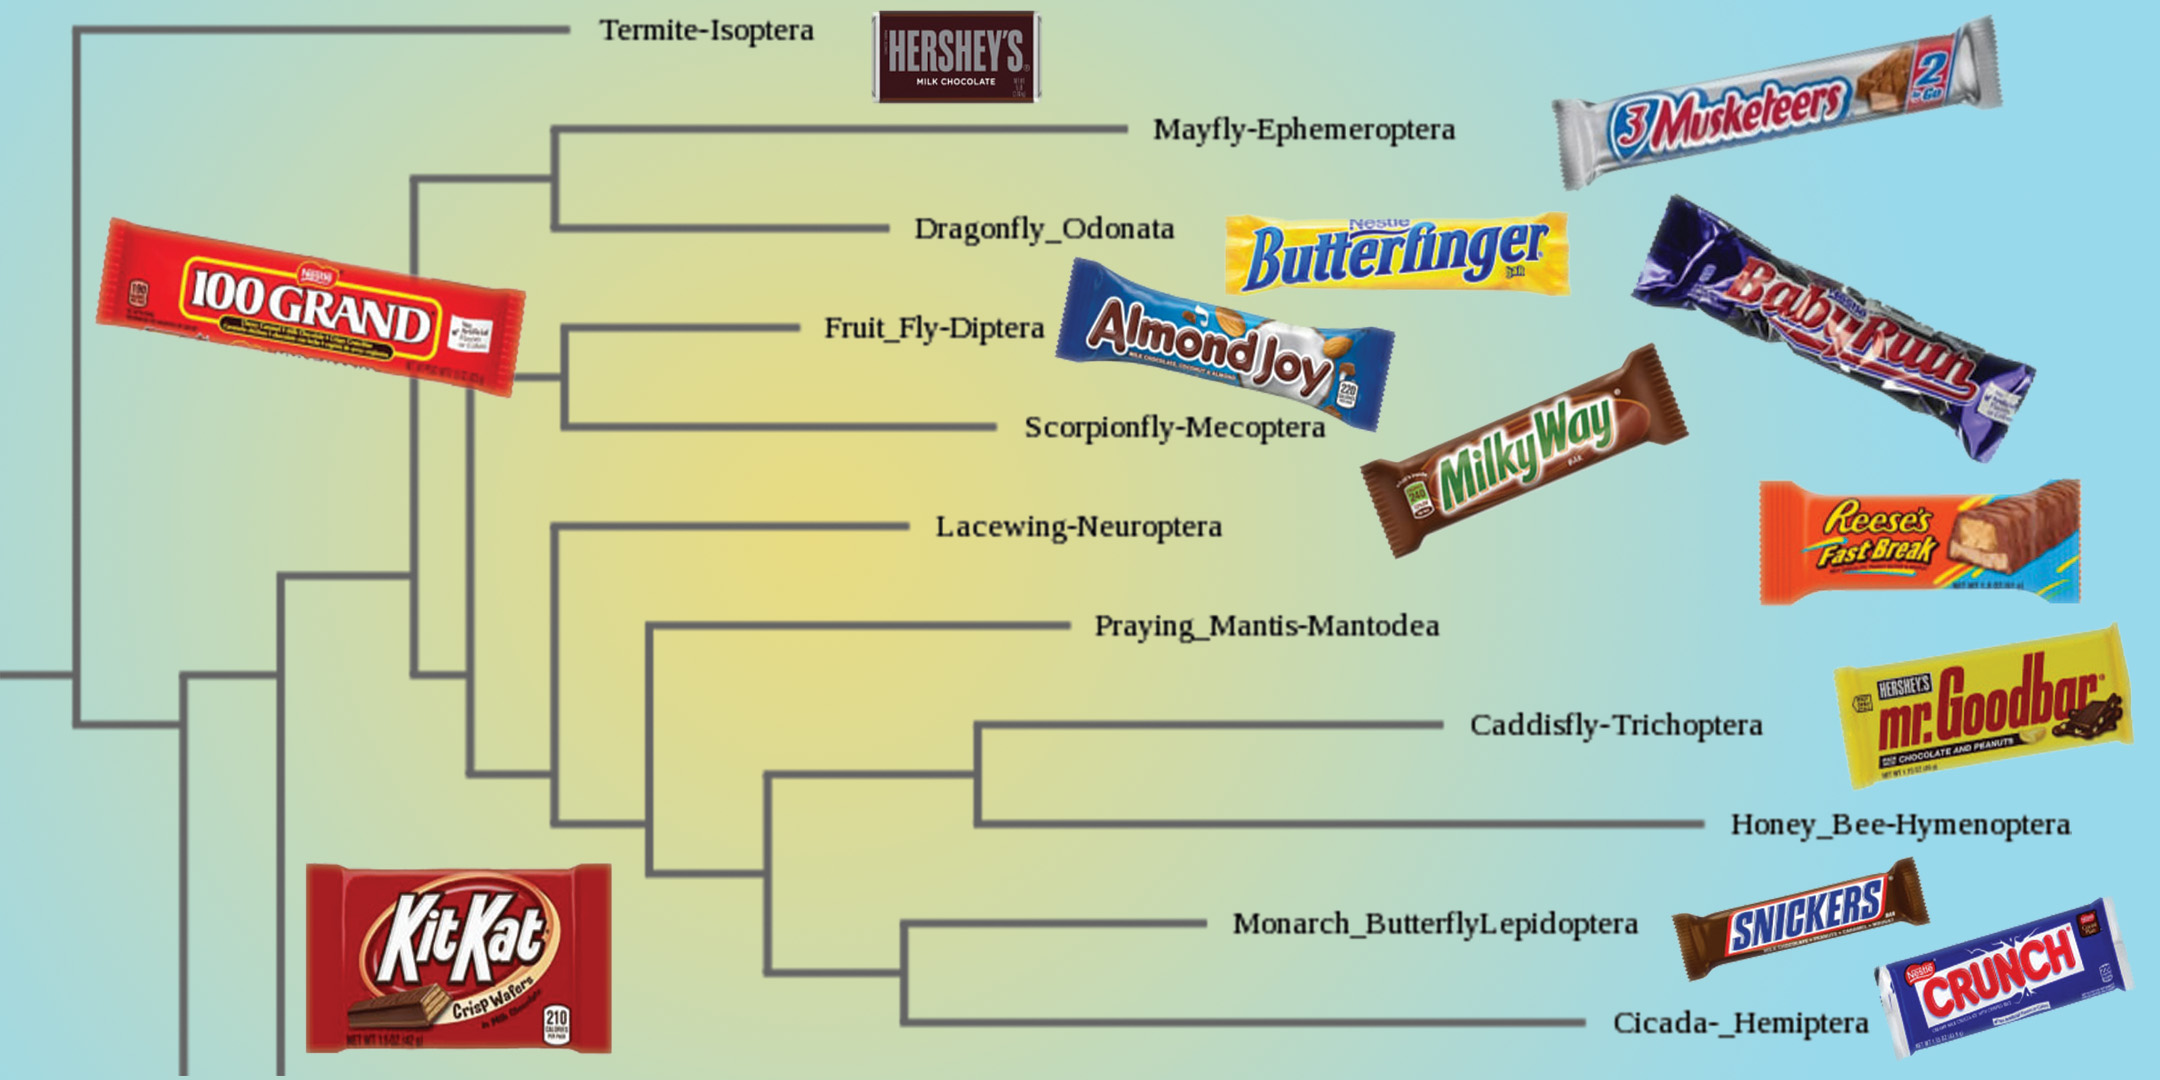 phylogenetic tree using candy bars